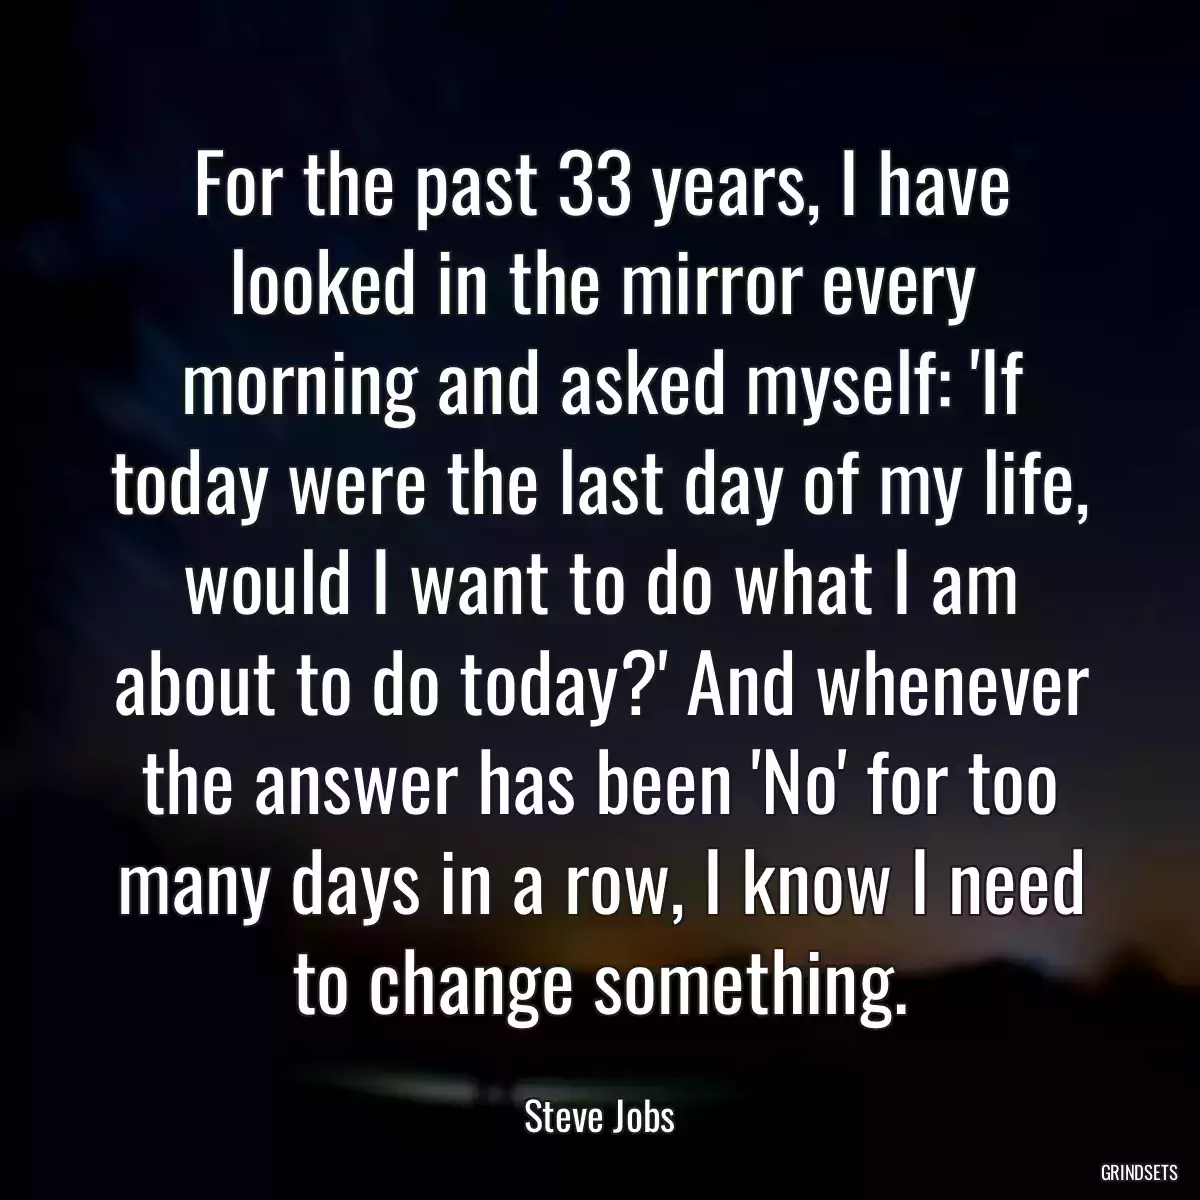 For the past 33 years, I have looked in the mirror every morning and asked myself: \'If today were the last day of my life, would I want to do what I am about to do today?\' And whenever the answer has been \'No\' for too many days in a row, I know I need to change something.